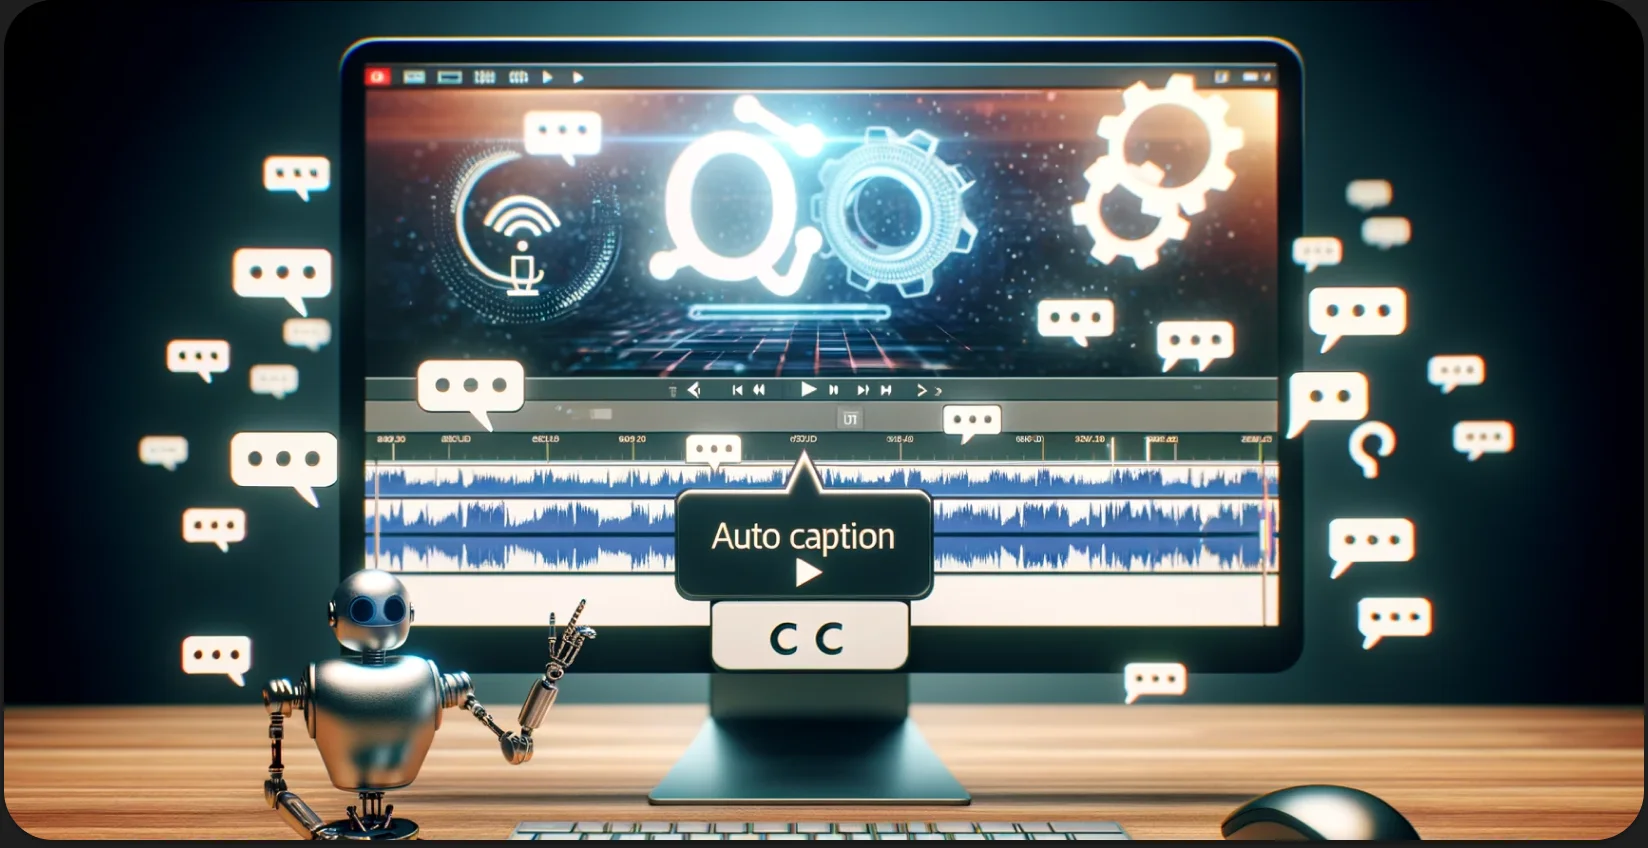 A desktop setup with auto captioning displayed on the screen, accompanied by a robot figurine.